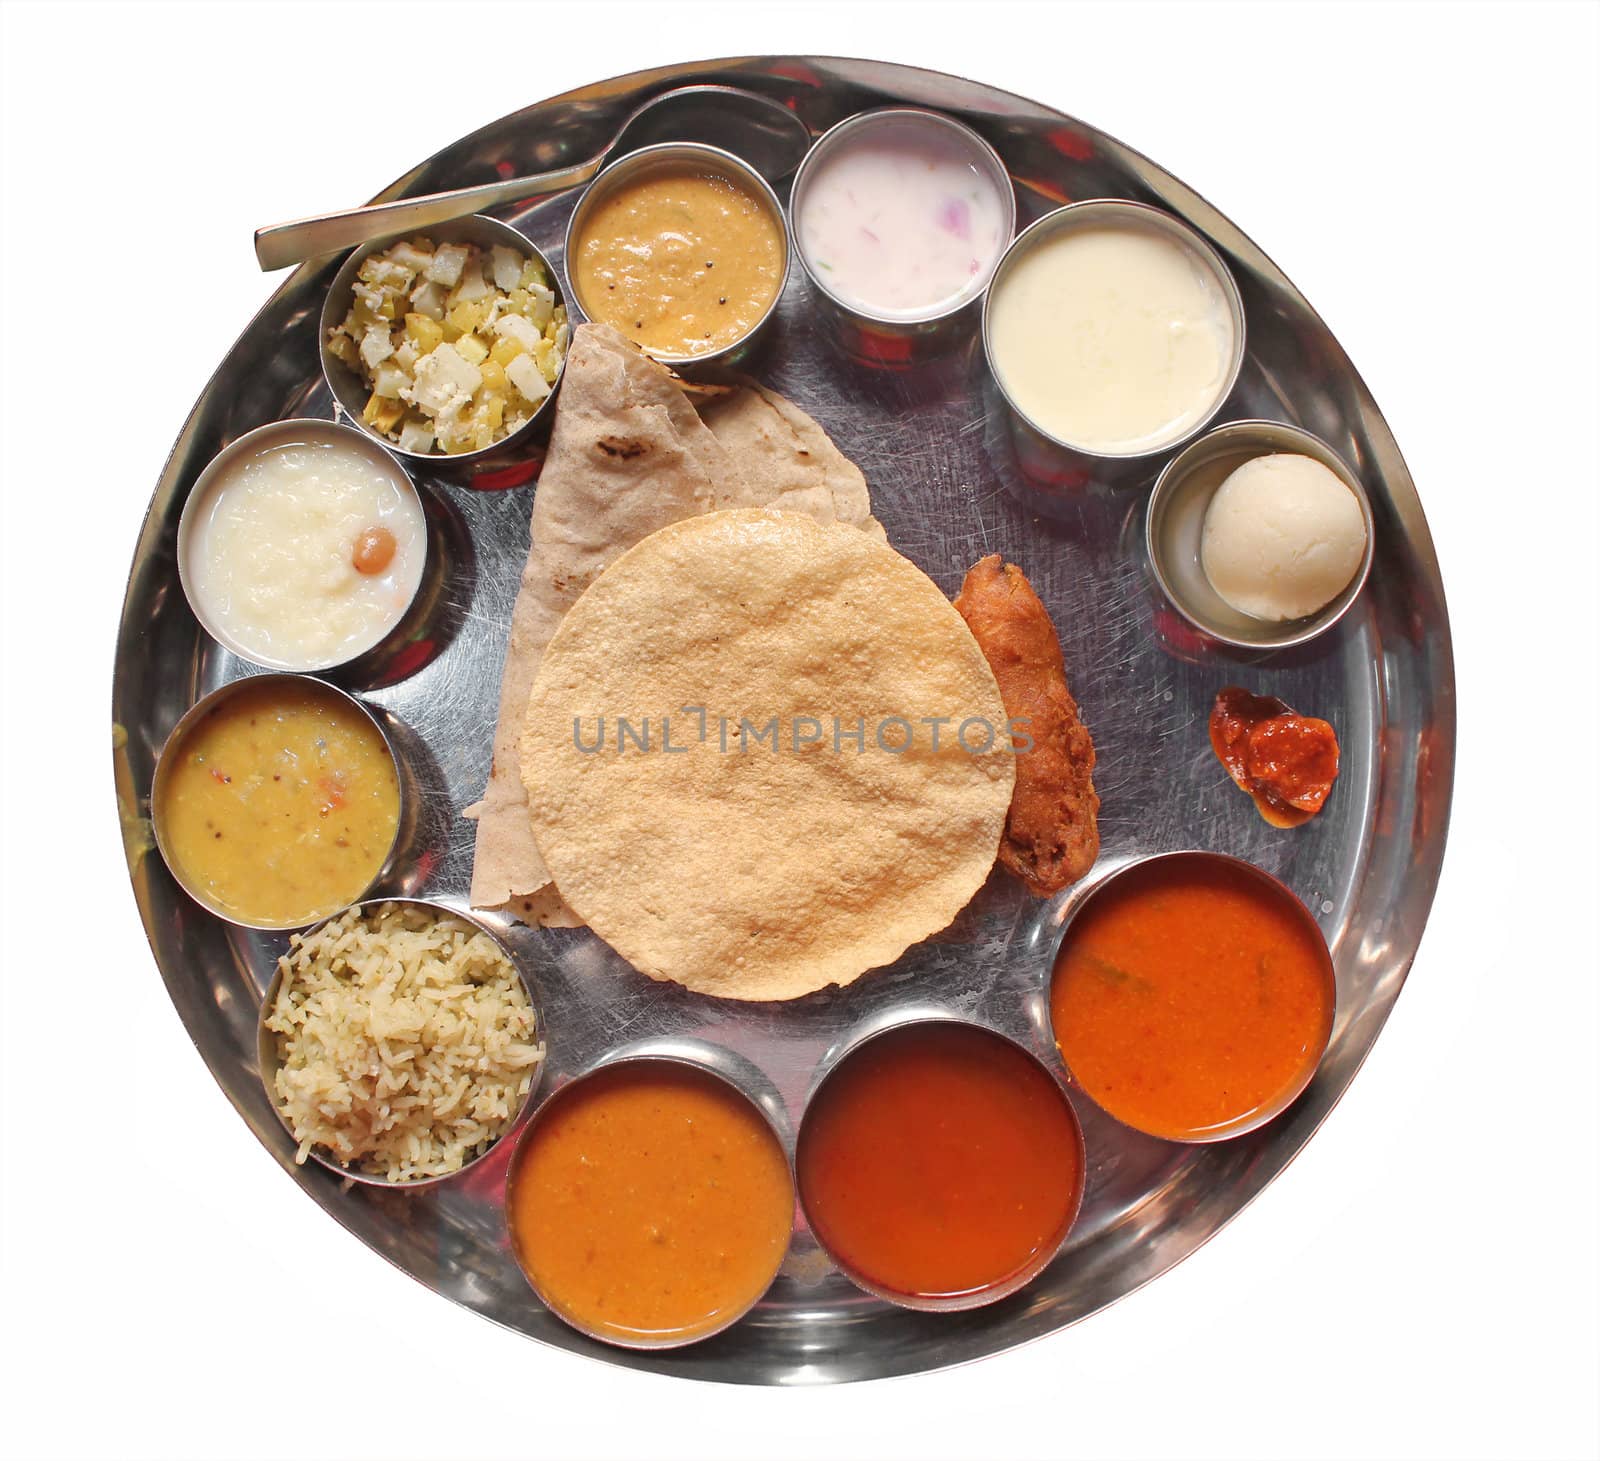 Indian plate meals with chapatti, rasam, sambar, dal and other curries